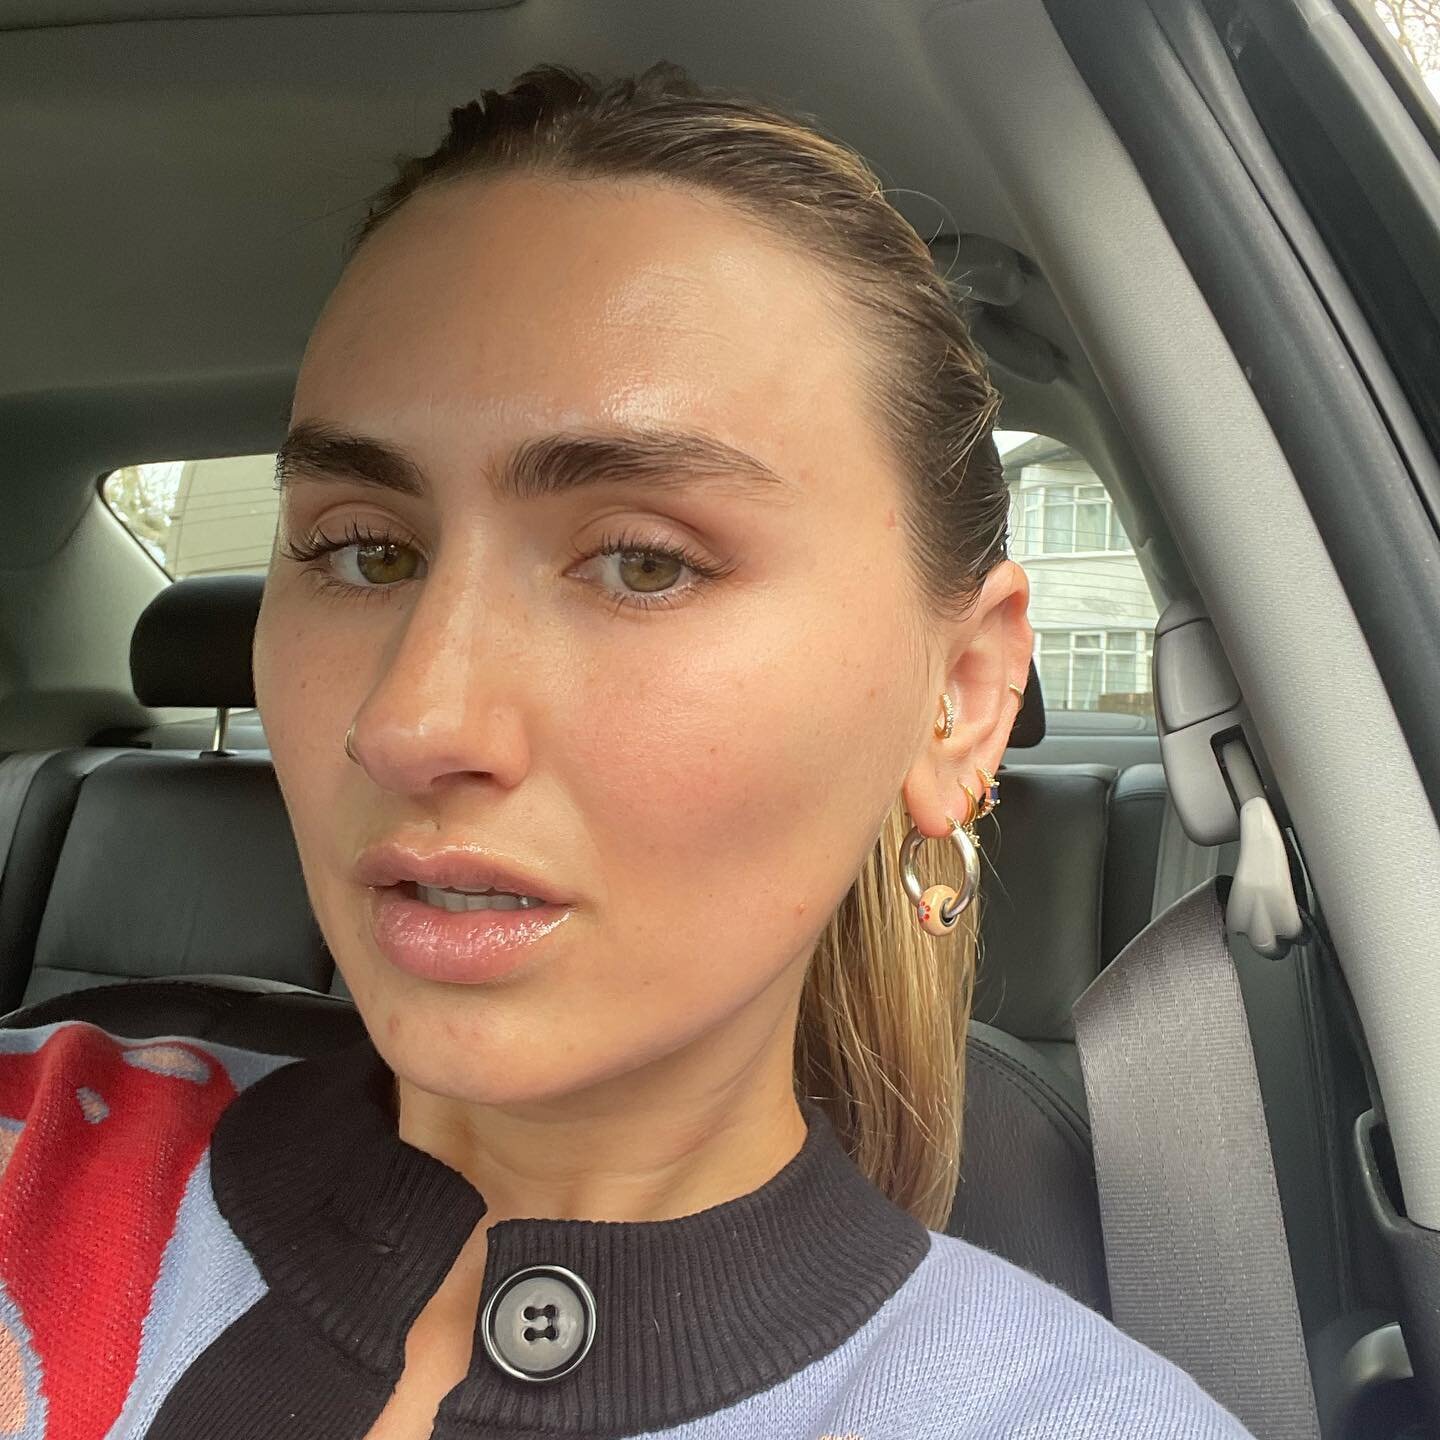 I did a collab today with the talented and beautiful @justskinuk and got one of their luxury hydrafacial and now I can&rsquo;t live without it! Video coming soon it&rsquo;s so relaxing woah ❤️

#nofilter 
#hydrafacial